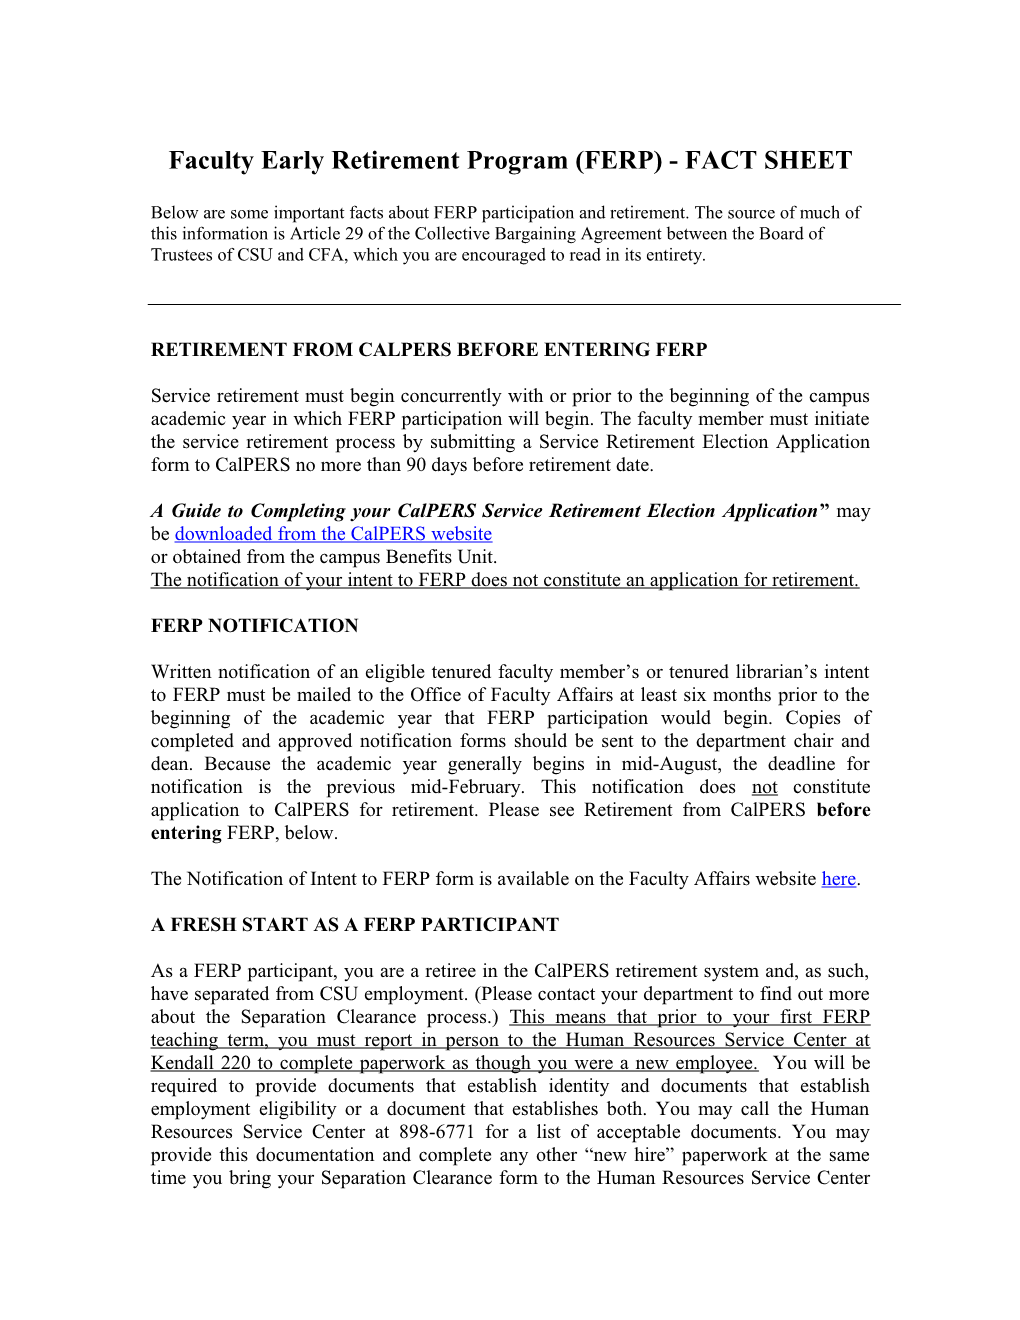 The Faculty Early Retirement Program (Ferp)